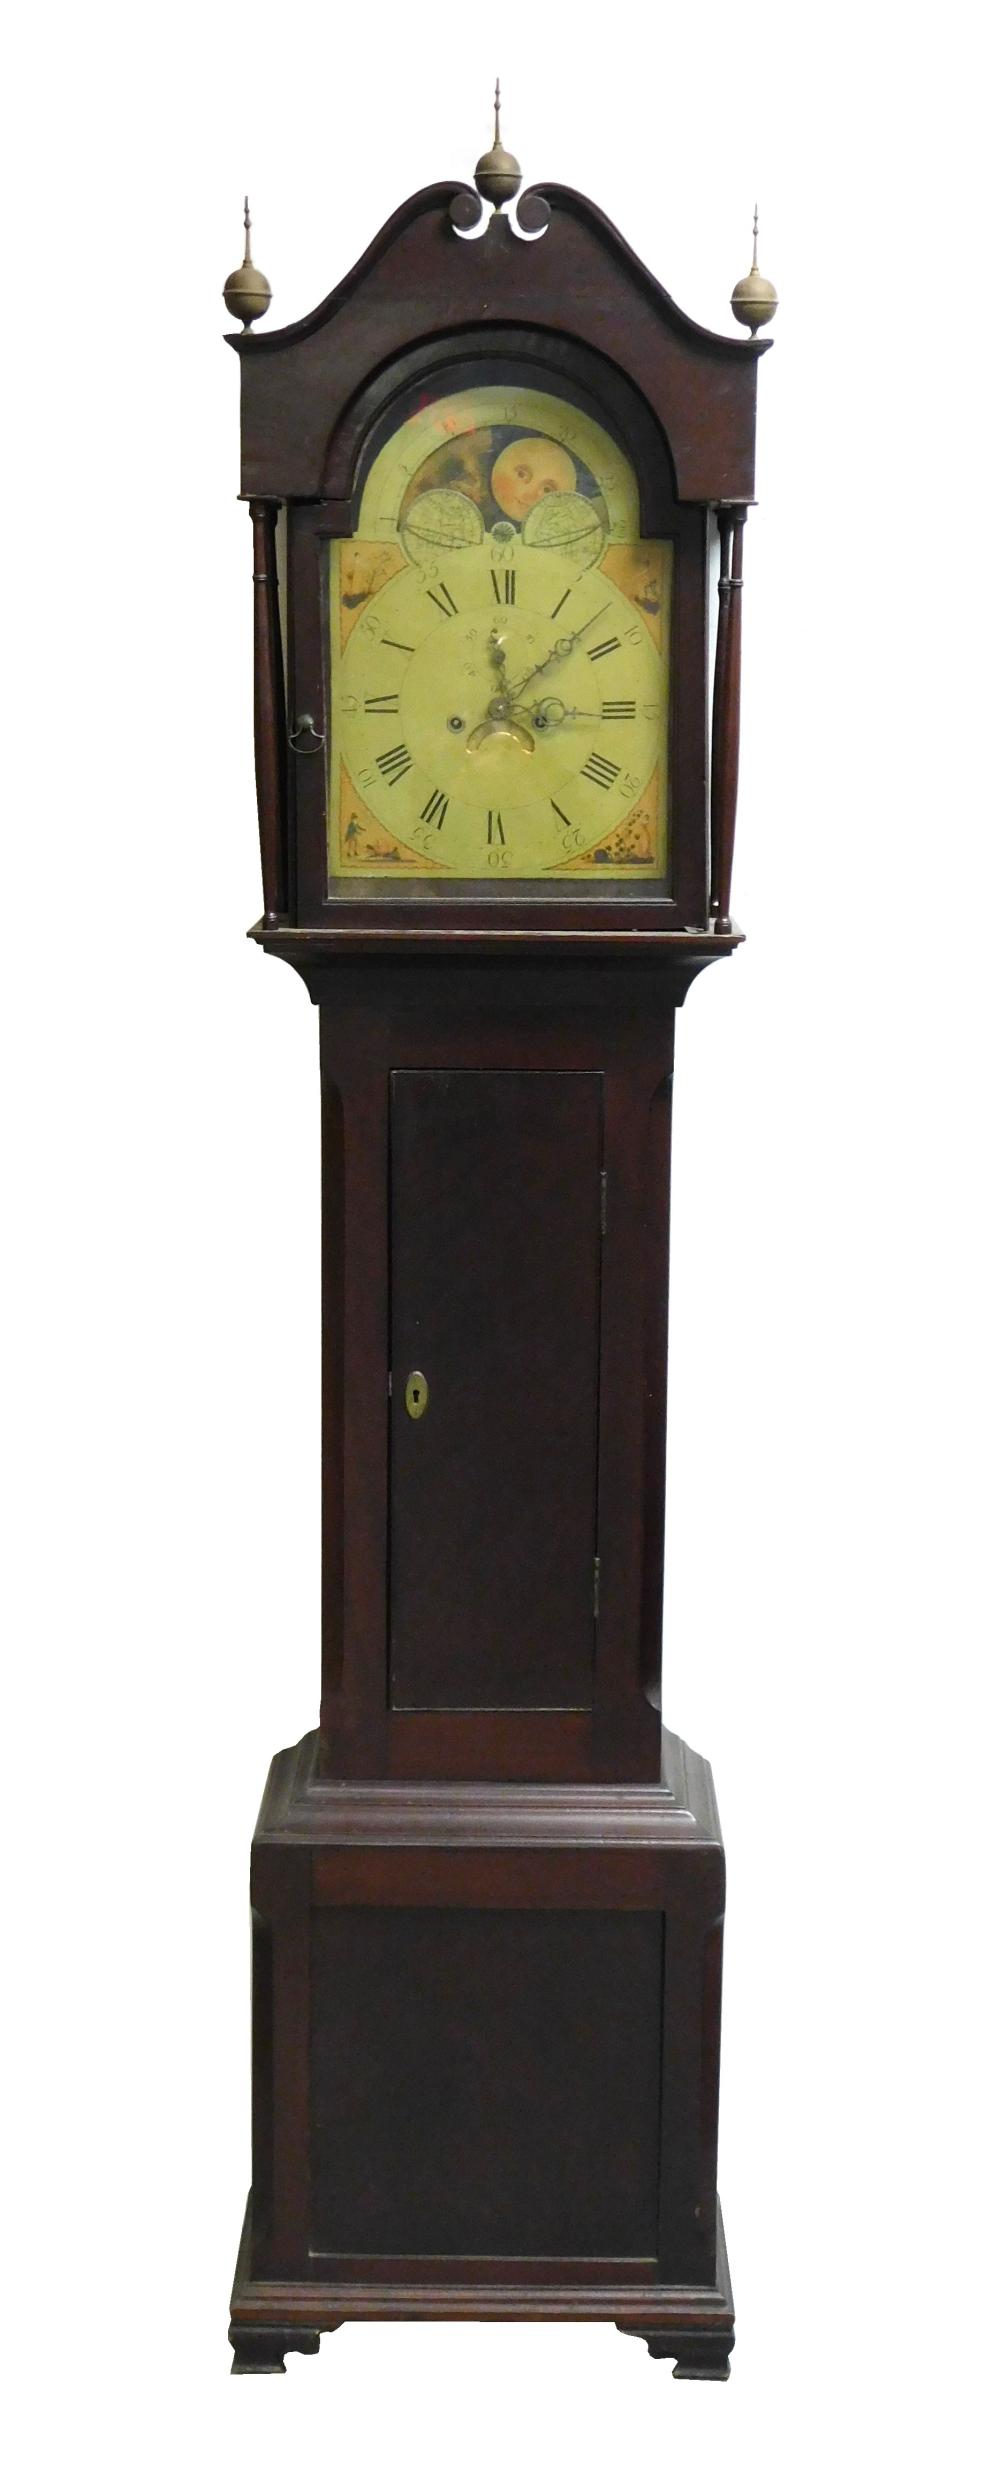 TALL CASE CLOCK C 1820 LIKELY 2e2a9d